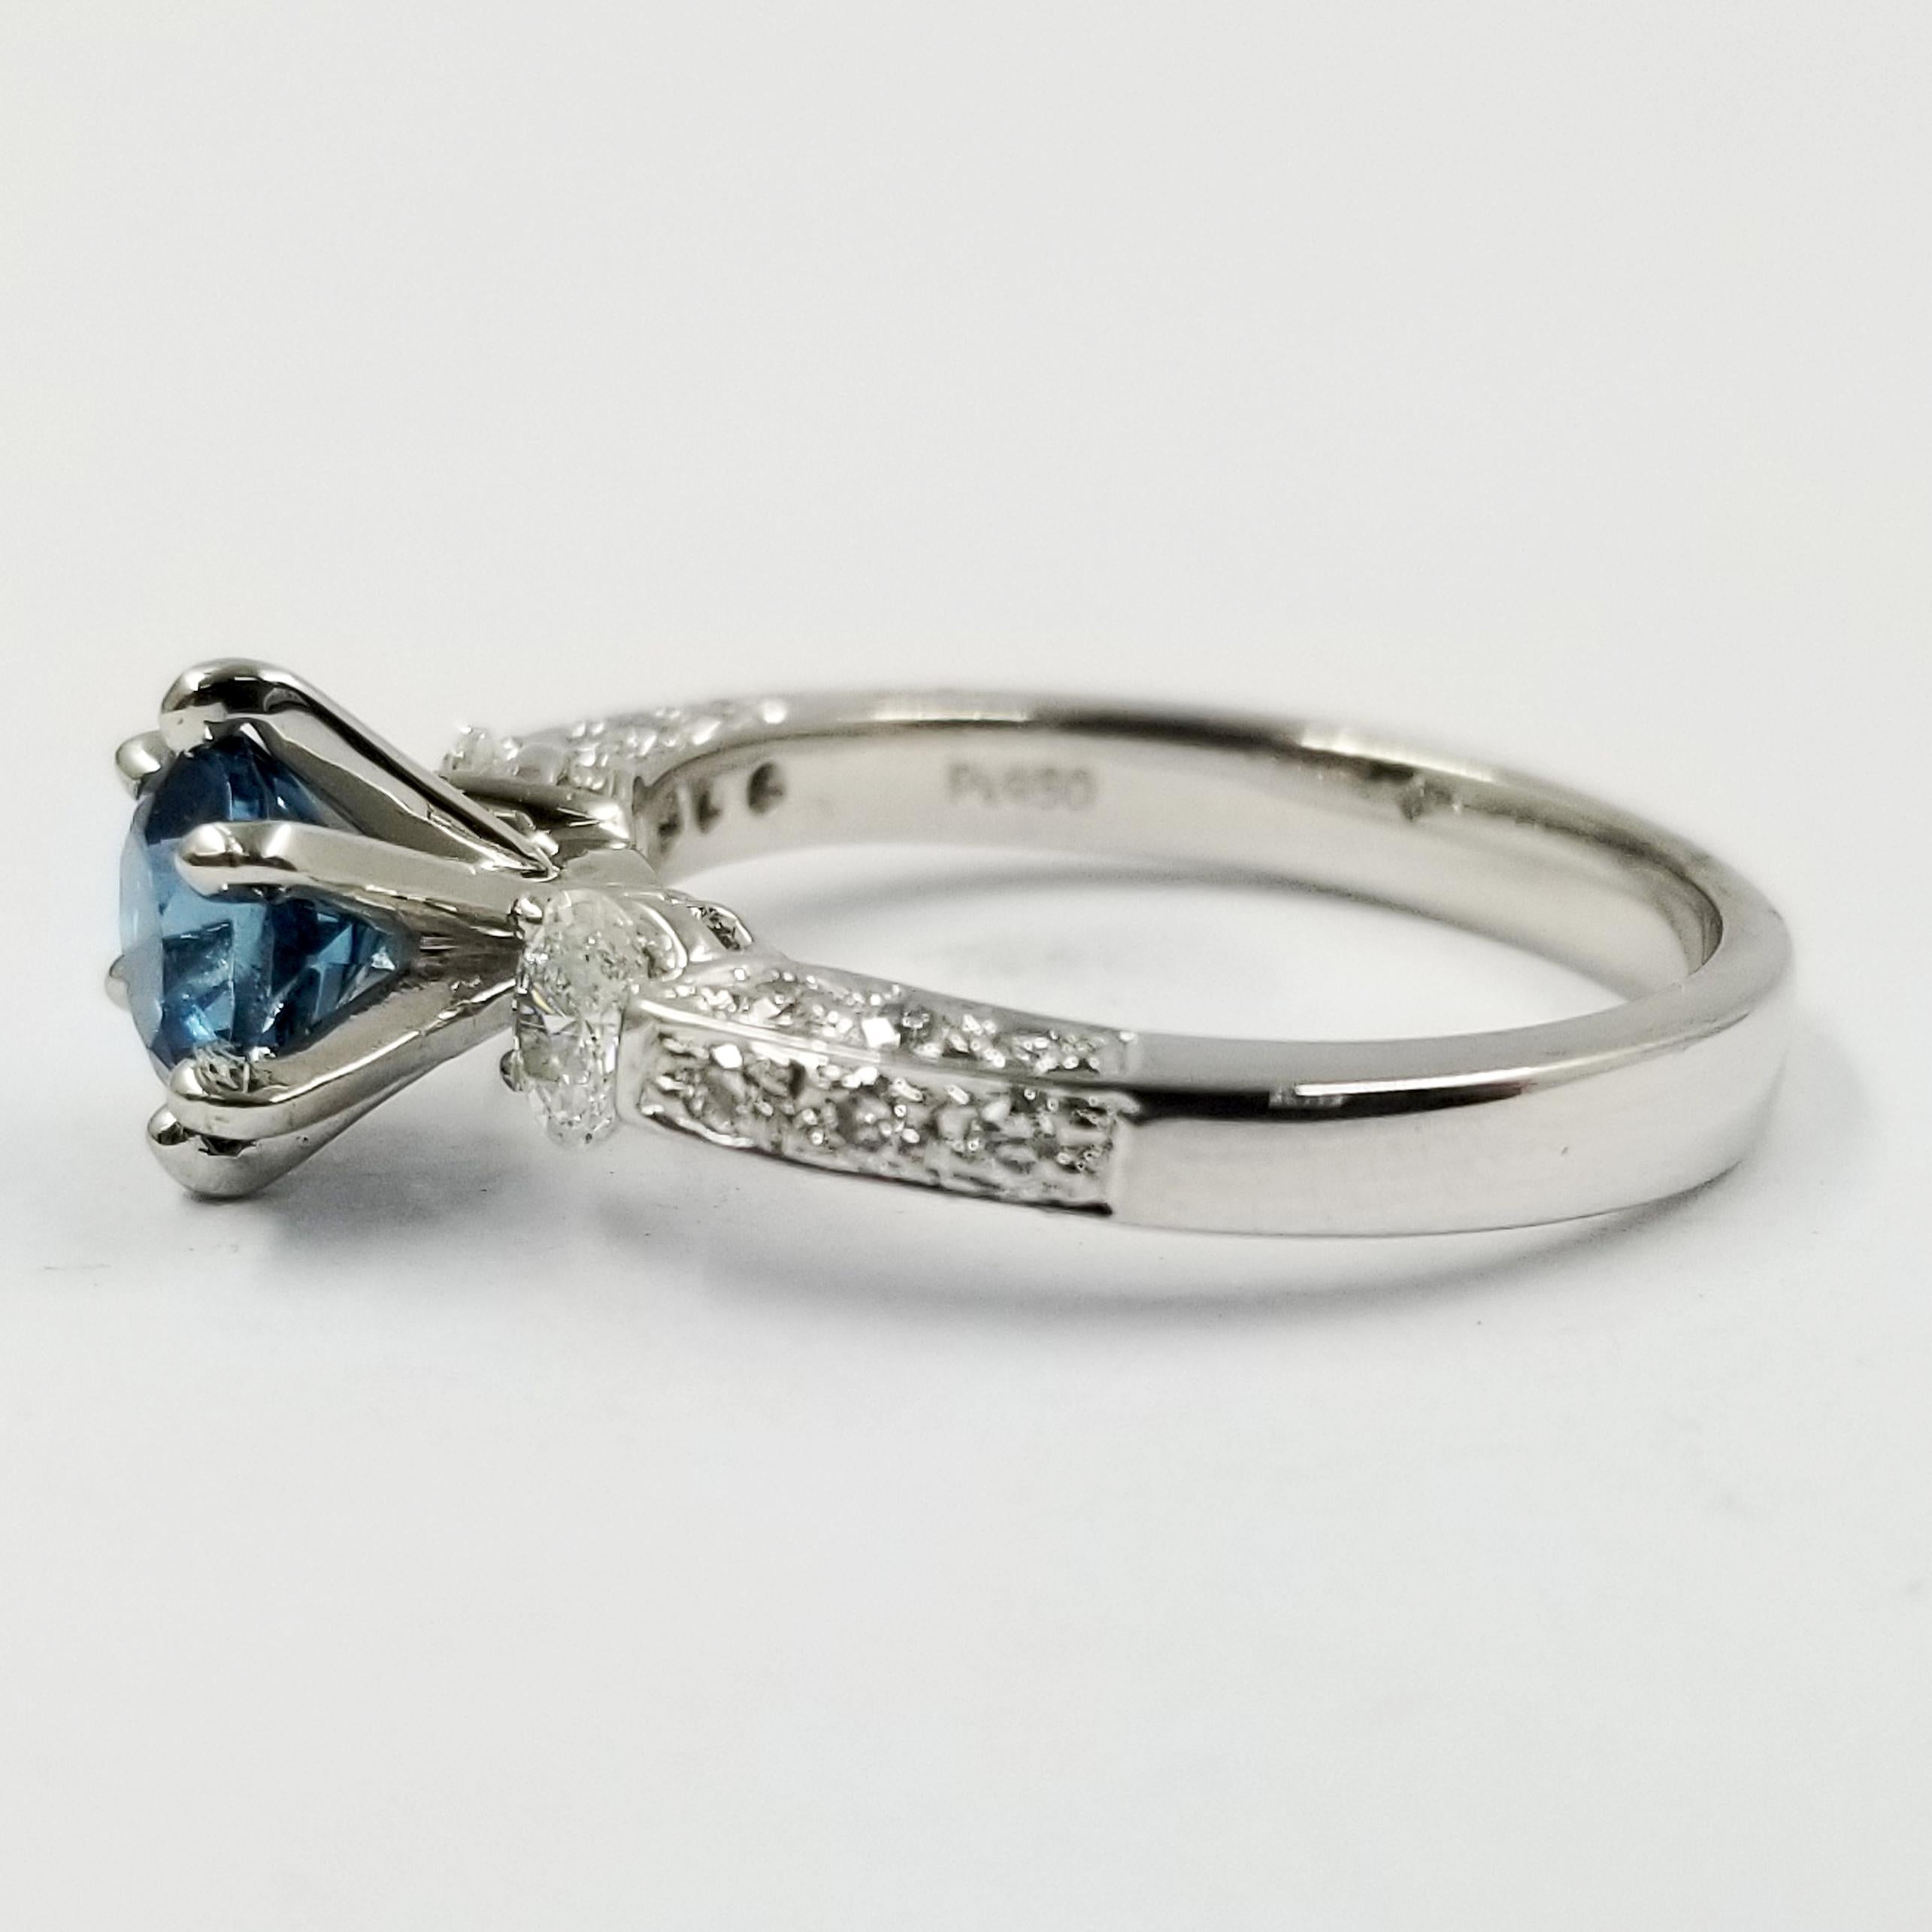 Platinum Ring Featuring a 1.02 Carat Bright Blue Topaz Center Stone in a 6 Prong Setting. The Mounting Also Contains 2 Oval and 18 Round Diamonds of VS Clarity & G Color Totaling 0.47 Carat Total Weight. Current Finger Size 7; Purchase Includes Free